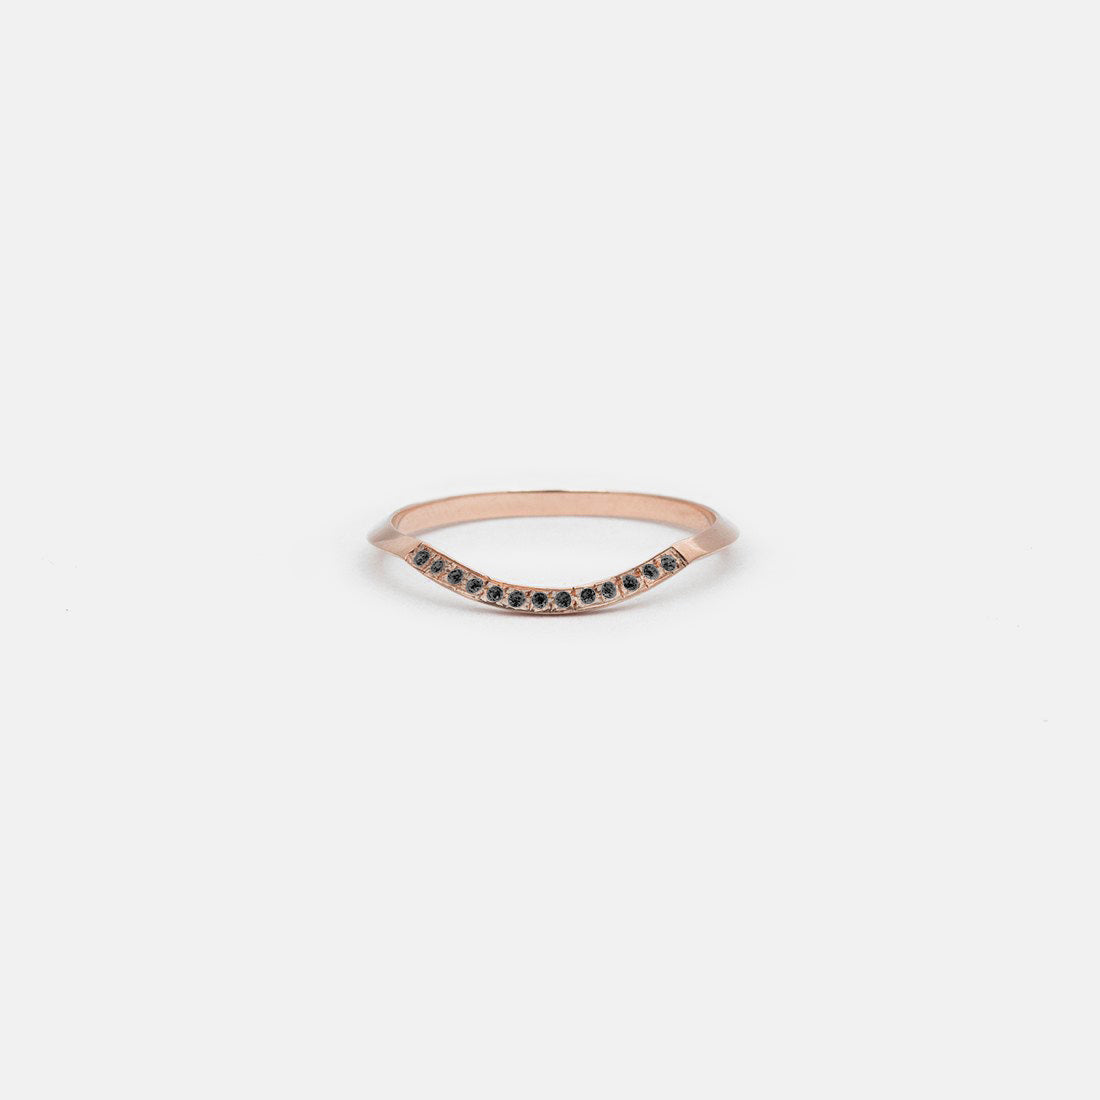 Arba Thin Ring in 14k Rose Gold set with Black Diamonds By SHW Fine Jewelry NYC